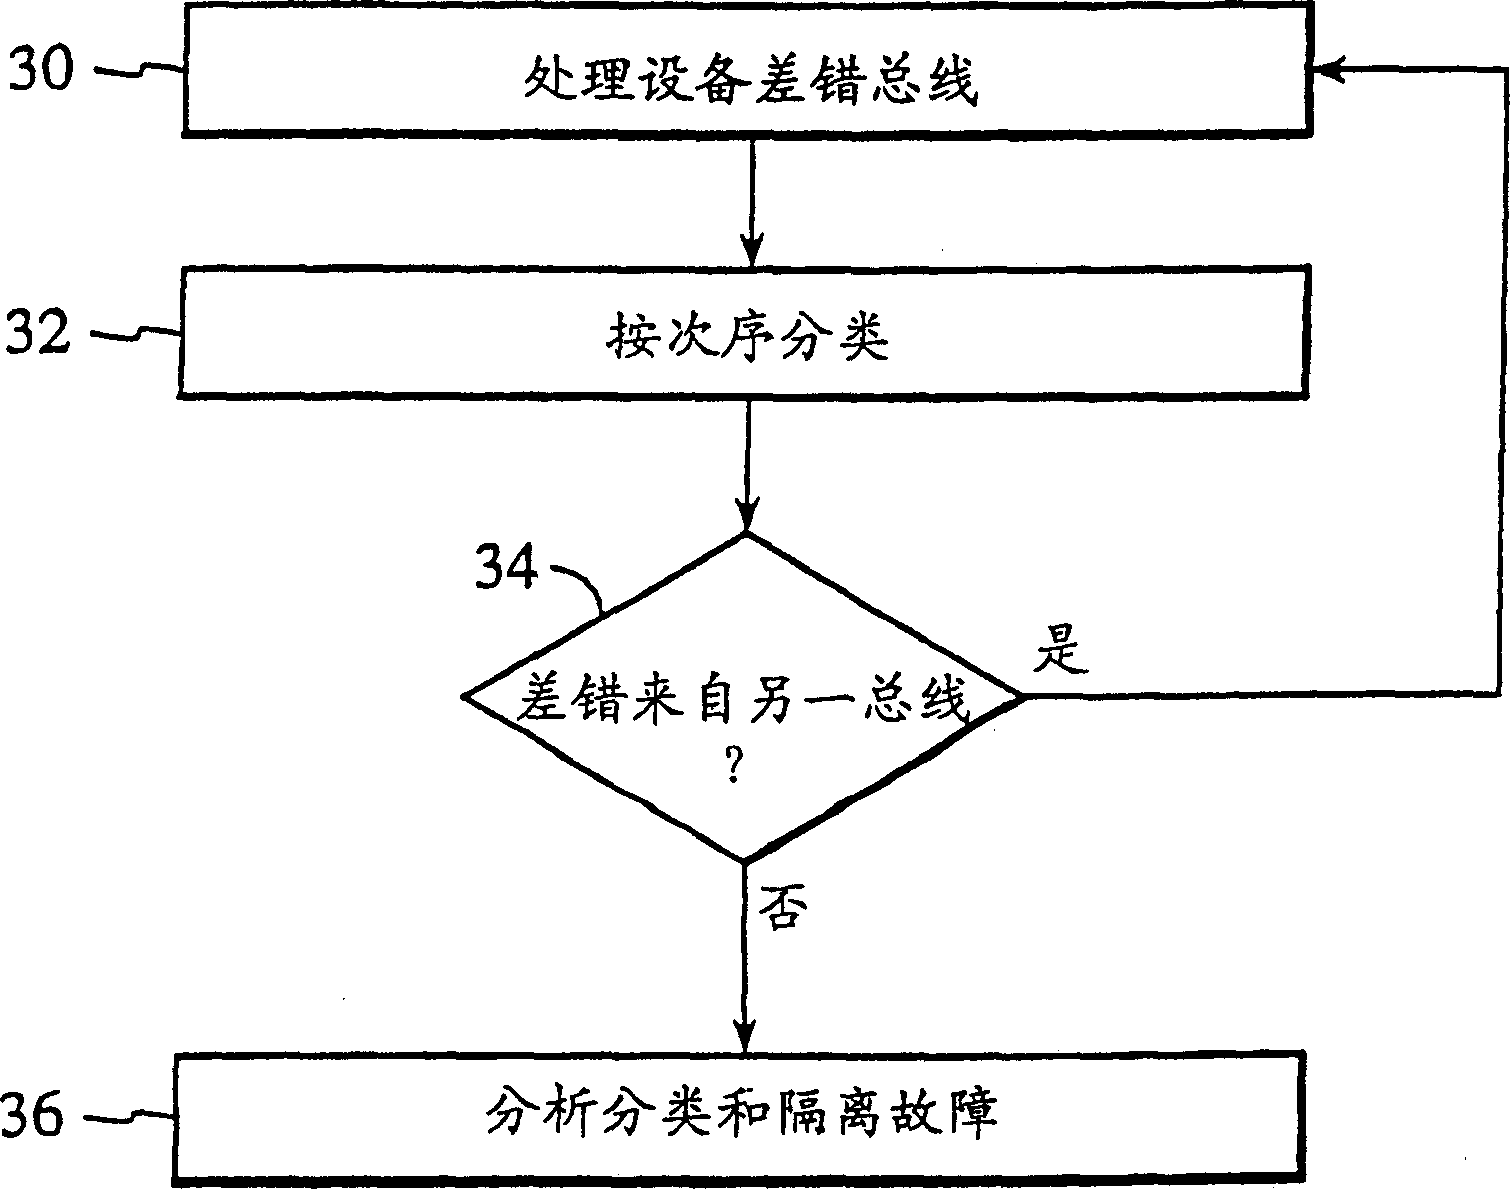 Method and system for fault isolation for PCI bus errors